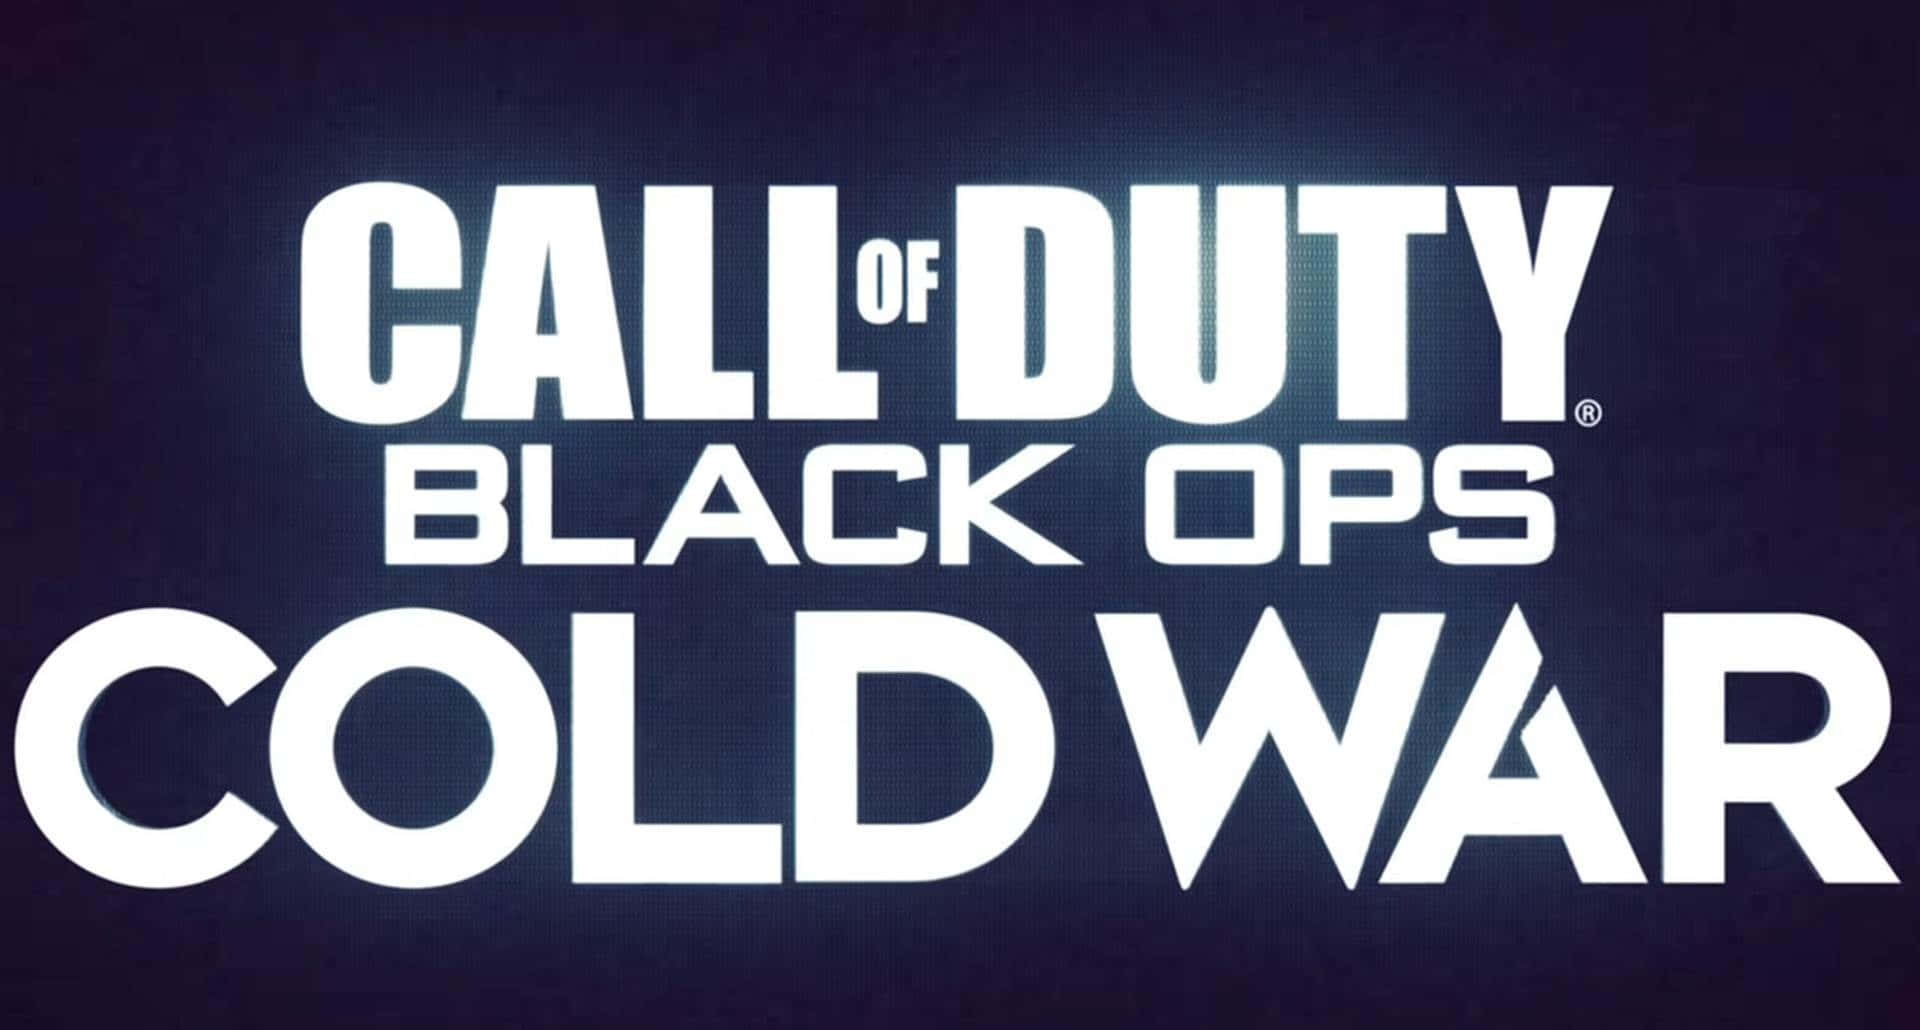 Get Ready for the Revolution with the New Call Of Duty Black Ops Cold War